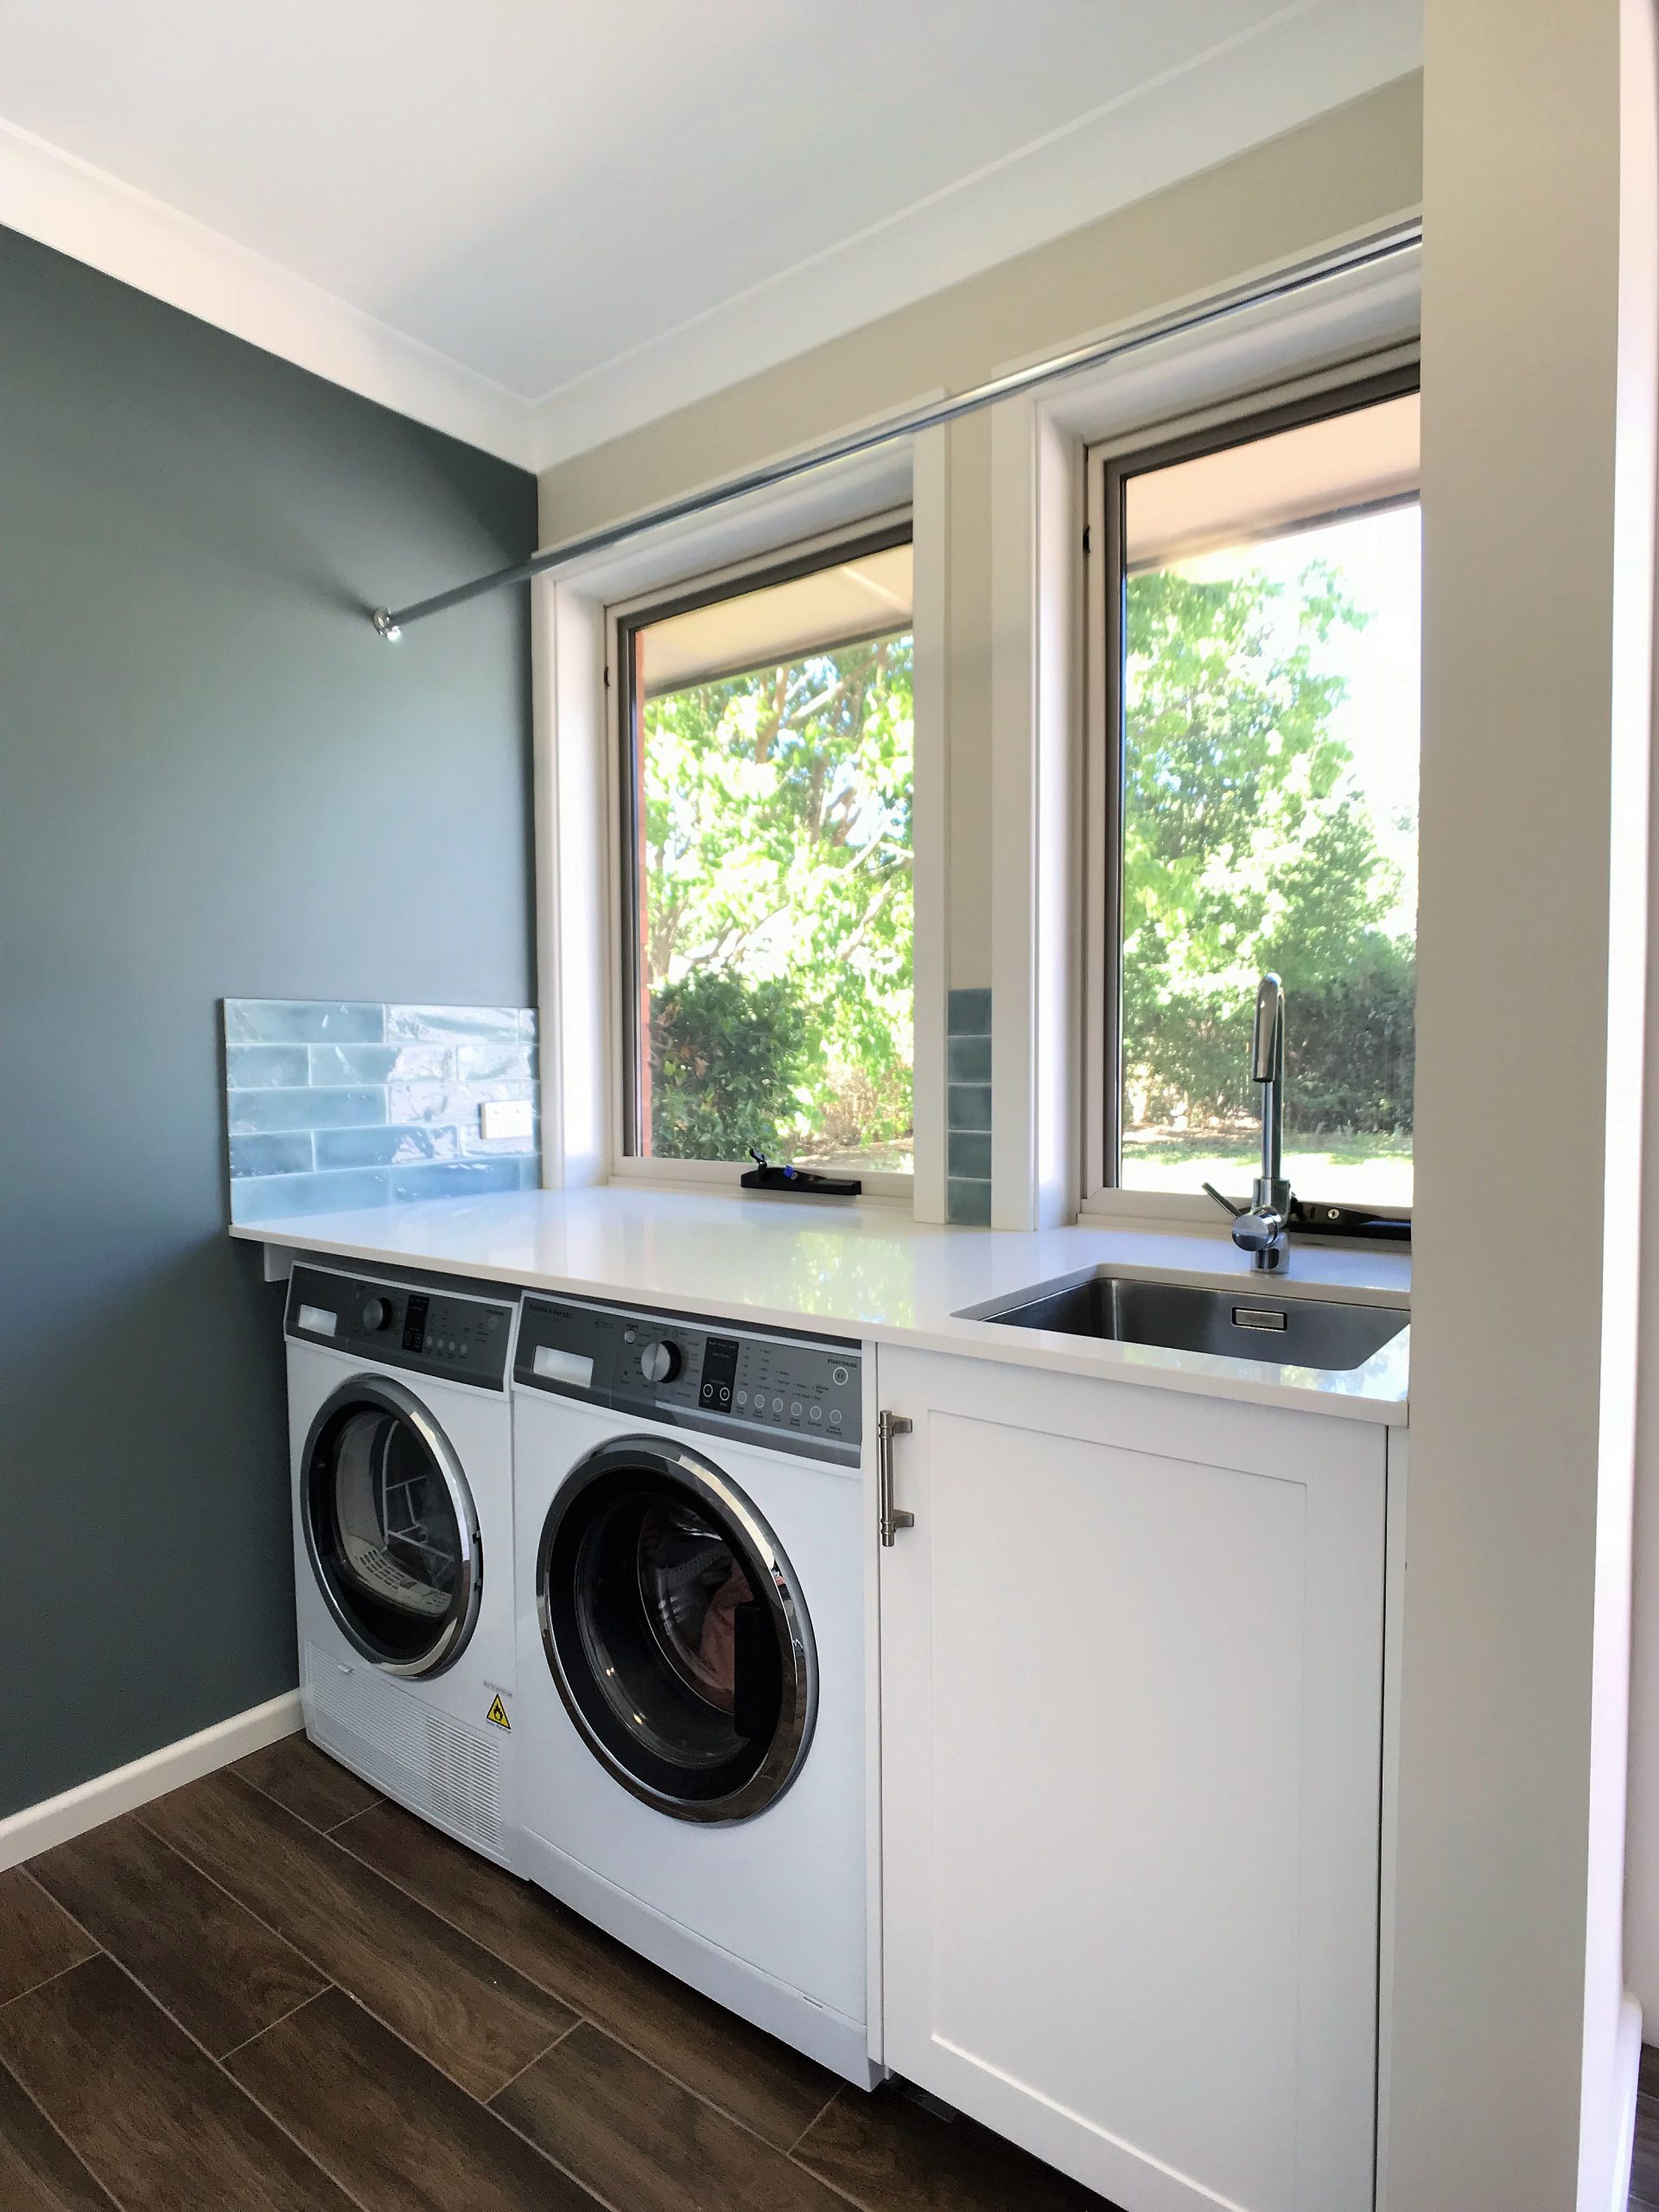 Laundry With Hanging Rail